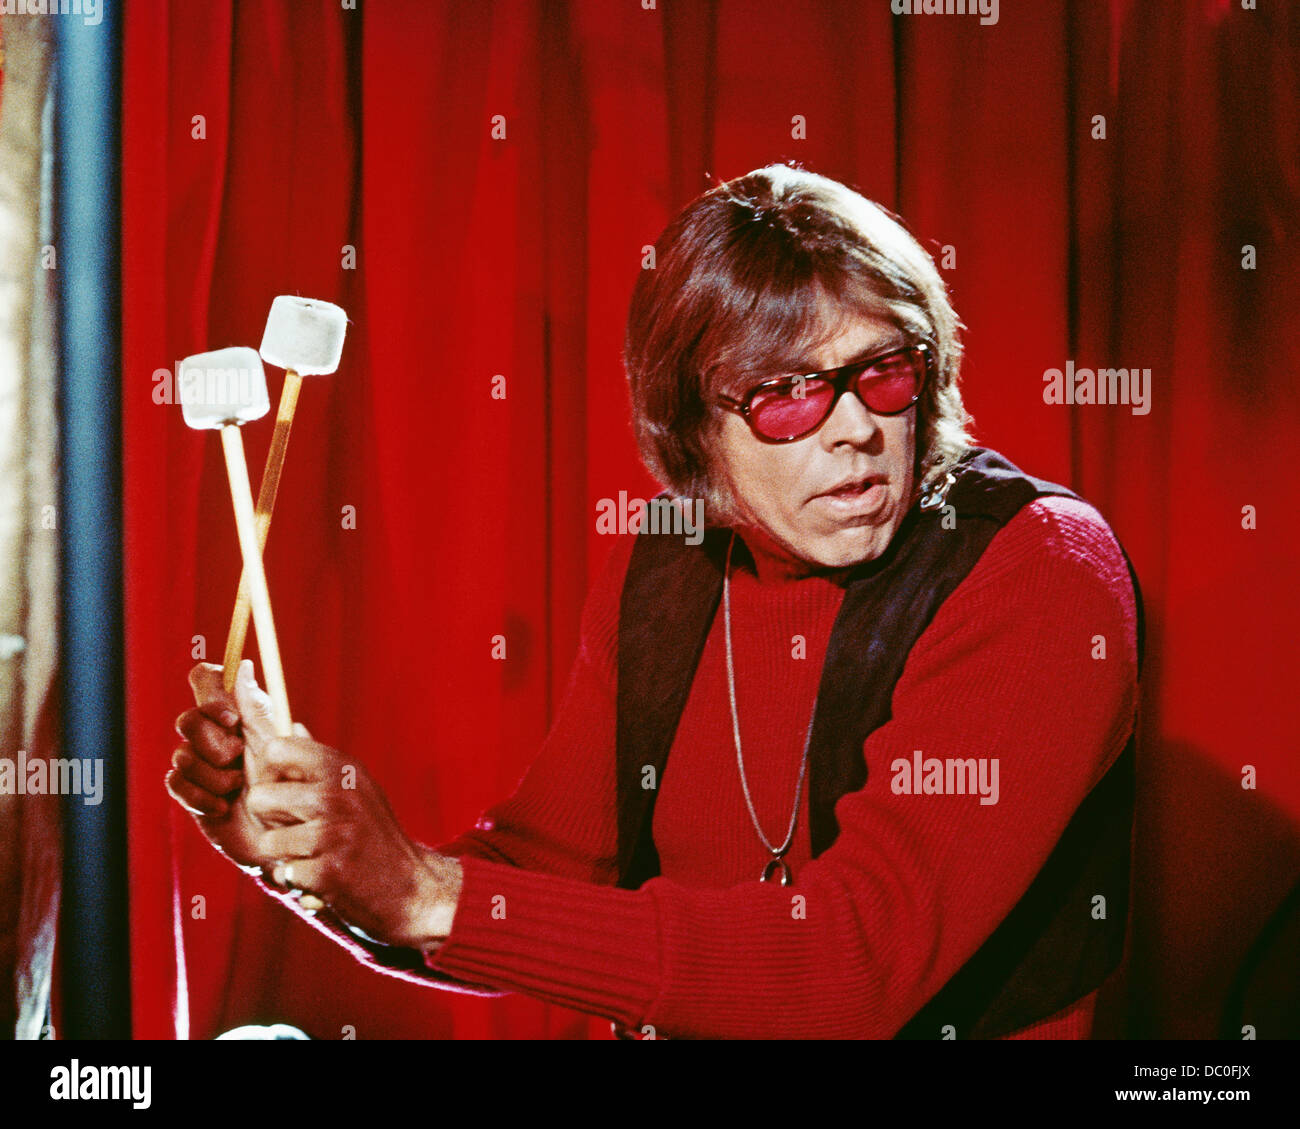 1960s 1967 MOTION PICTURE THE PRESIDENT'S ANALYST STAR JAMES COBURN PLAYING DRUMS Stock Photo